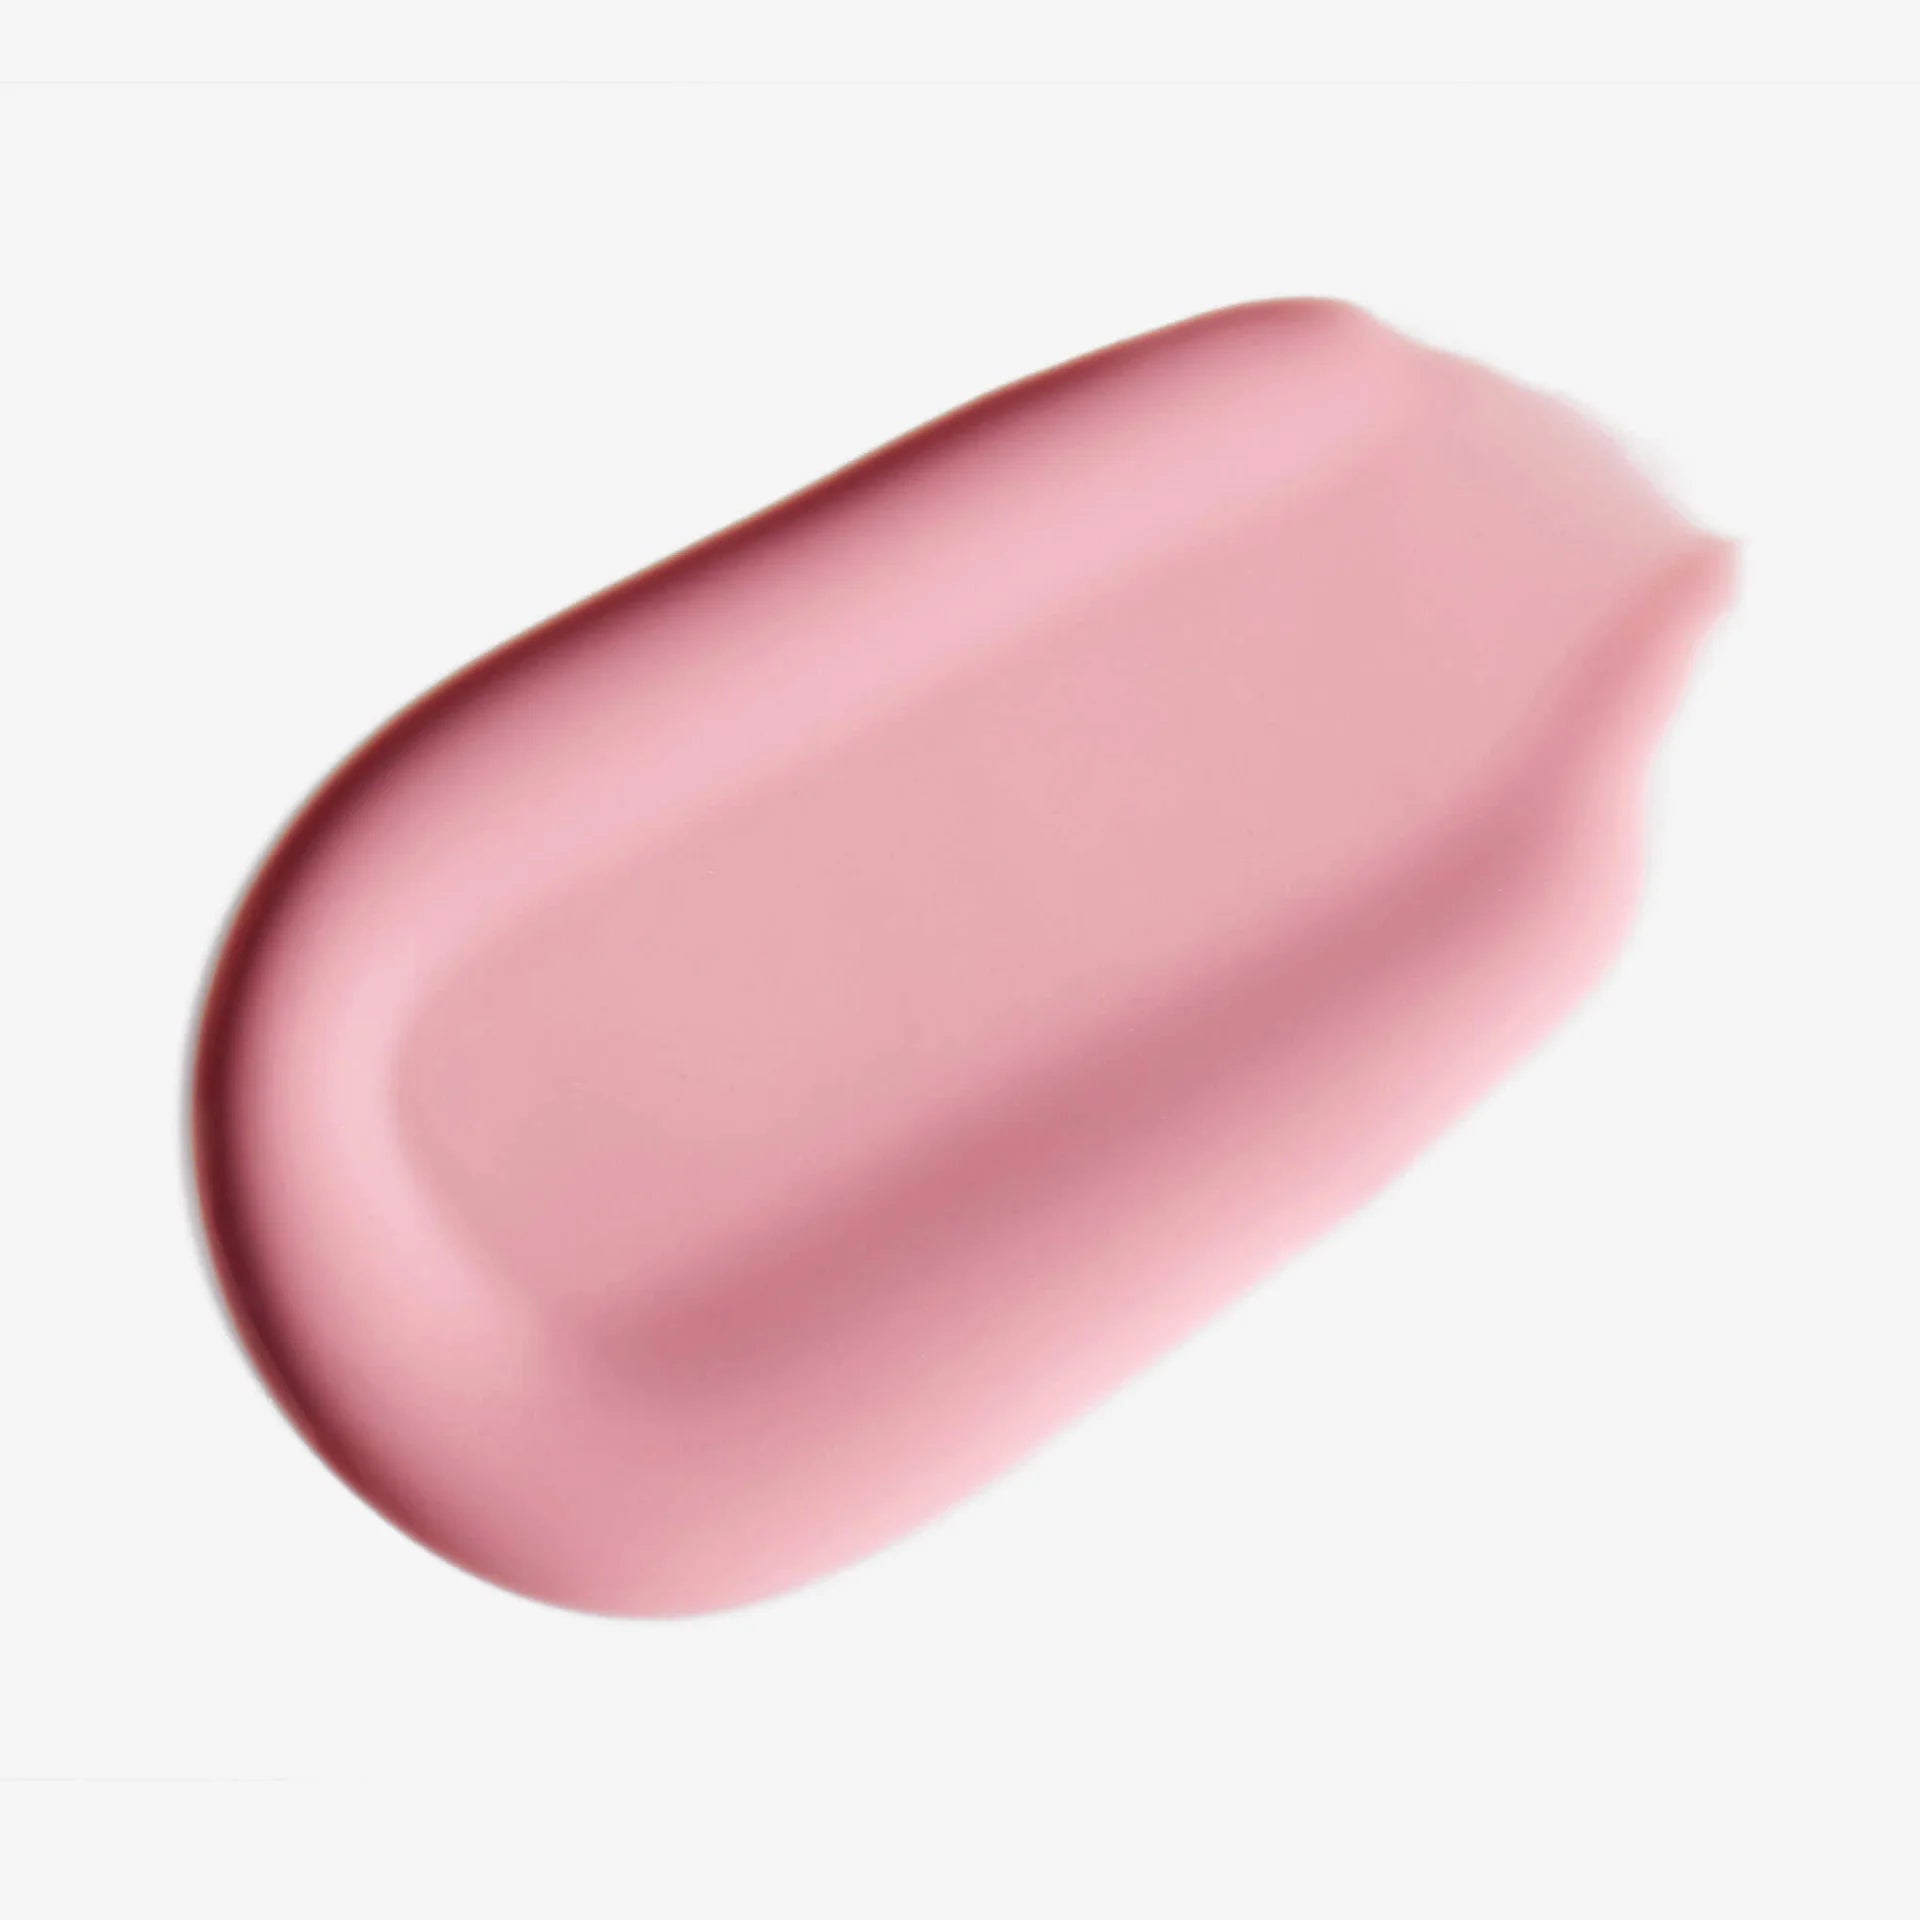 Cotton Candy |Lip Gloss Swatch Shade Cotton Candy